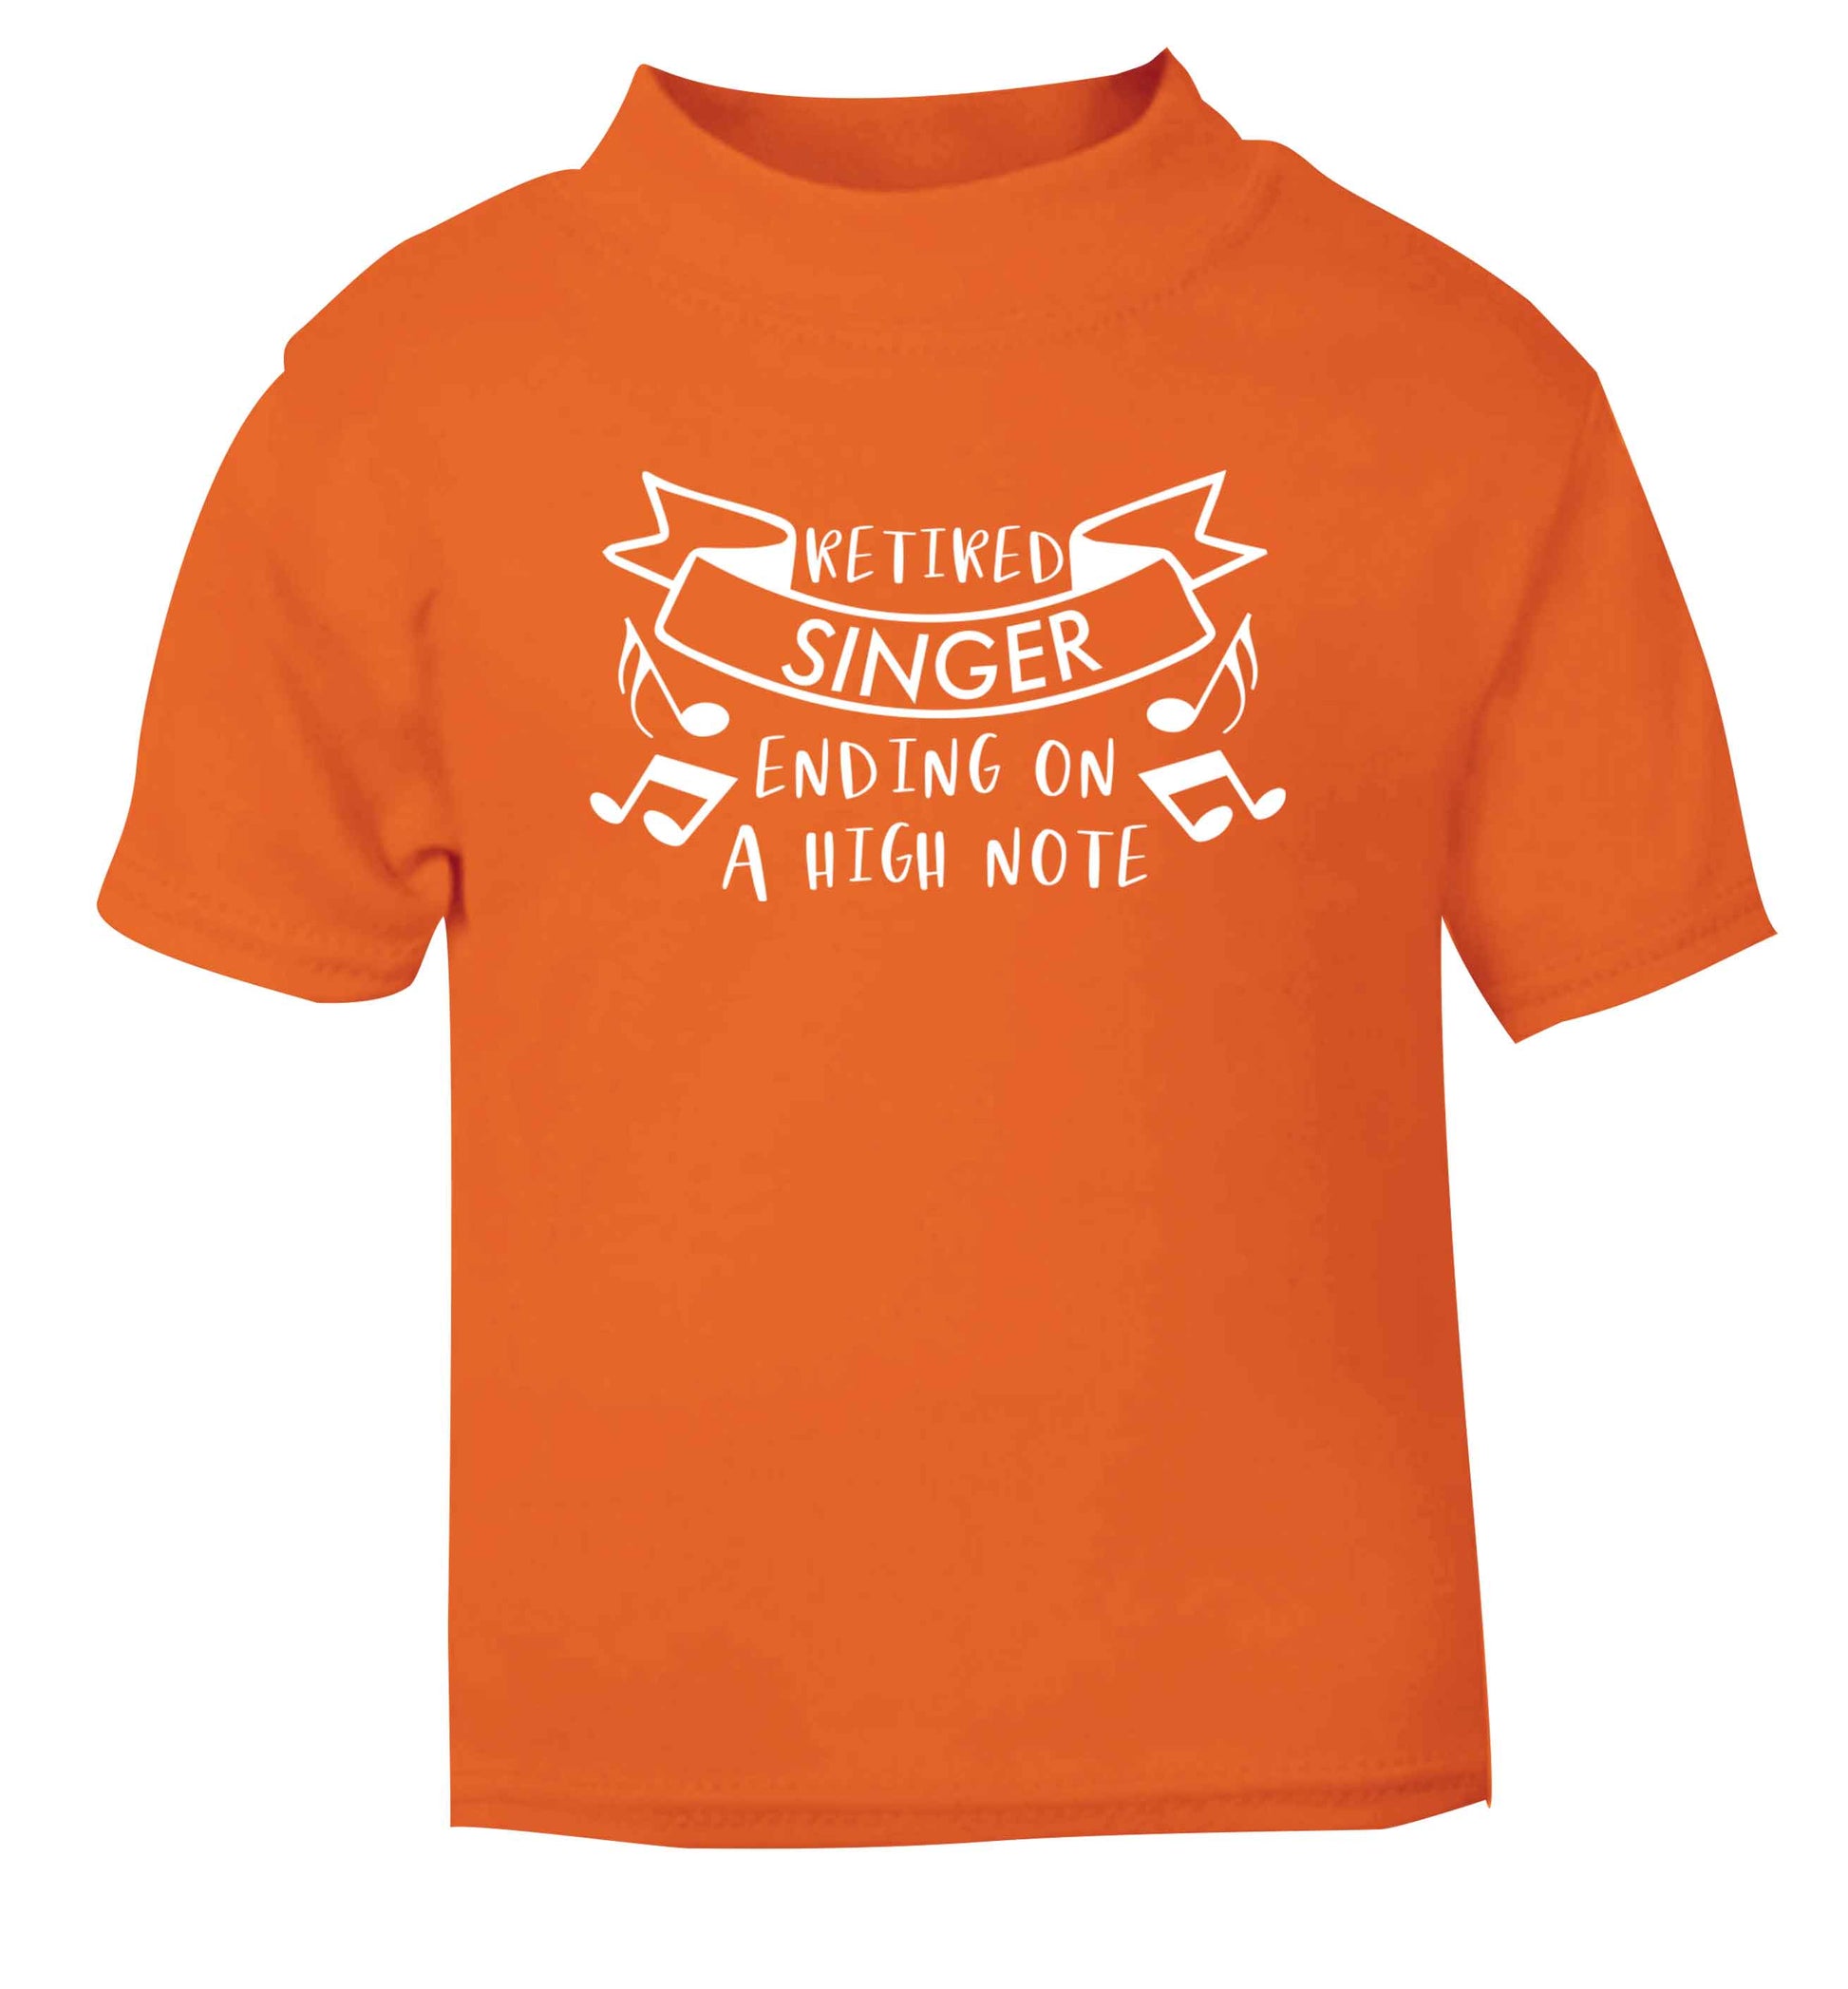 Retired singer ending on a high note orange Baby Toddler Tshirt 2 Years